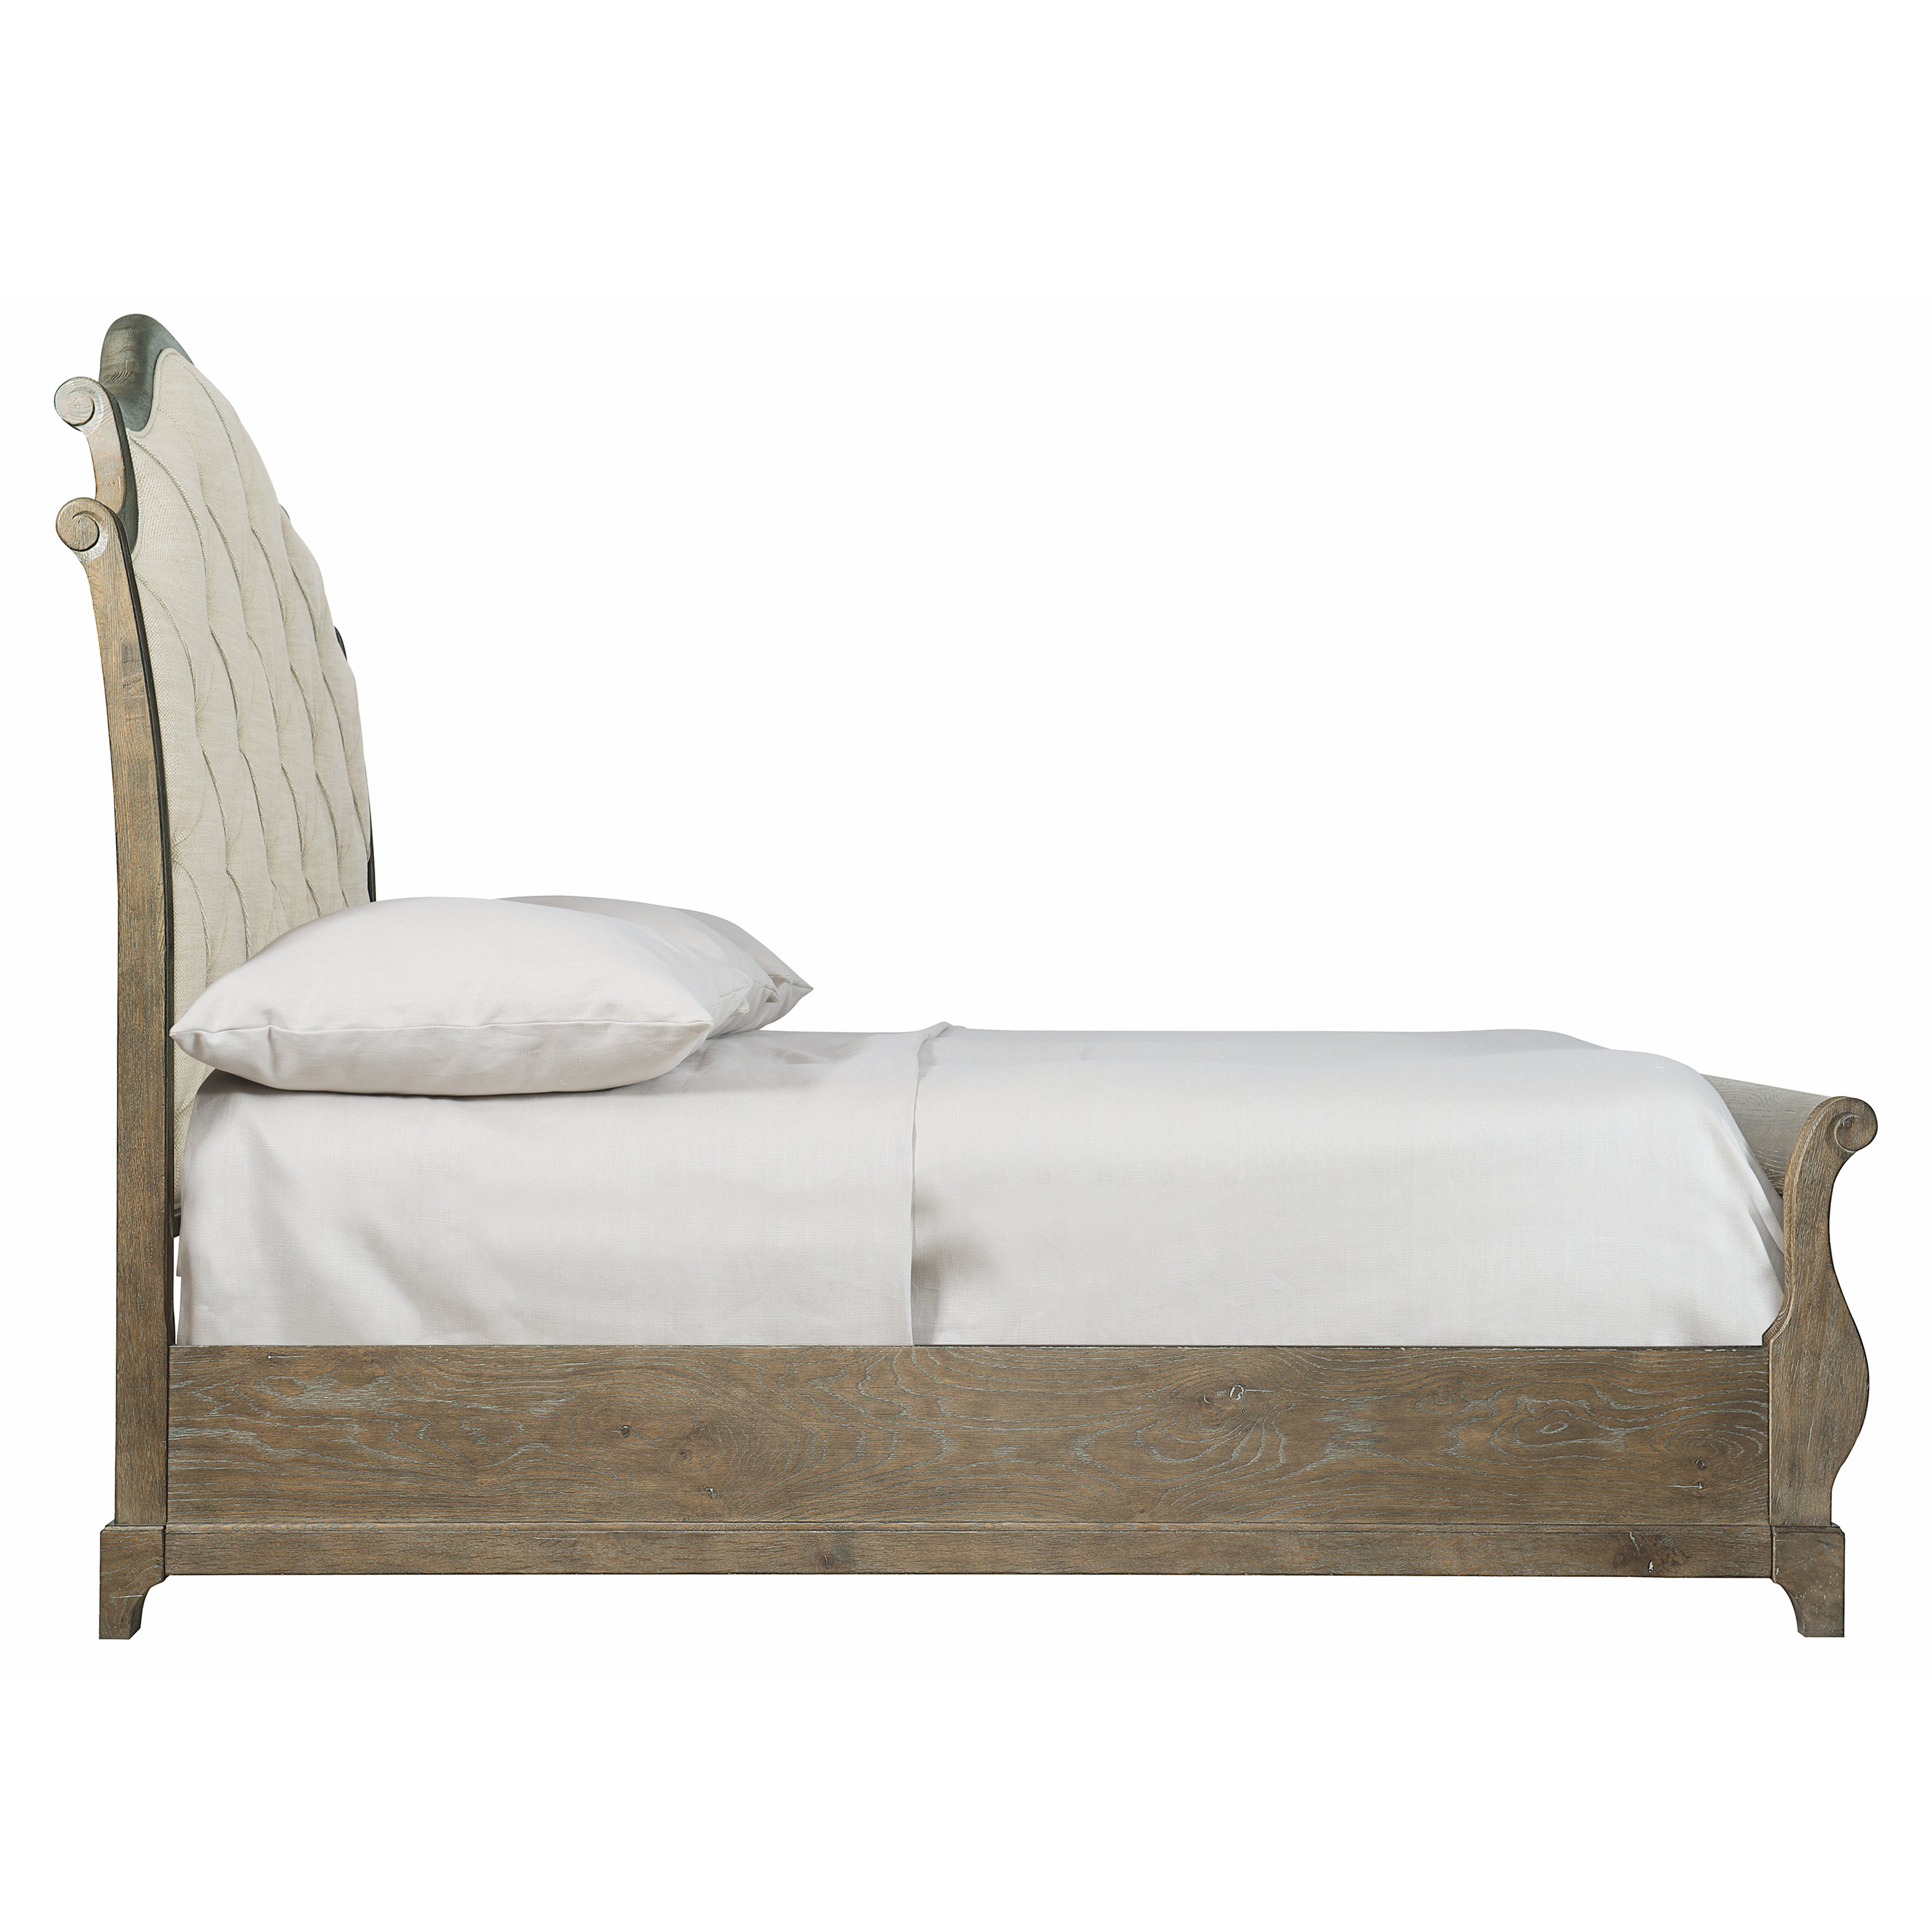 Rustic Patina Upholstered King Sleigh Bed in Peppercorn Finish